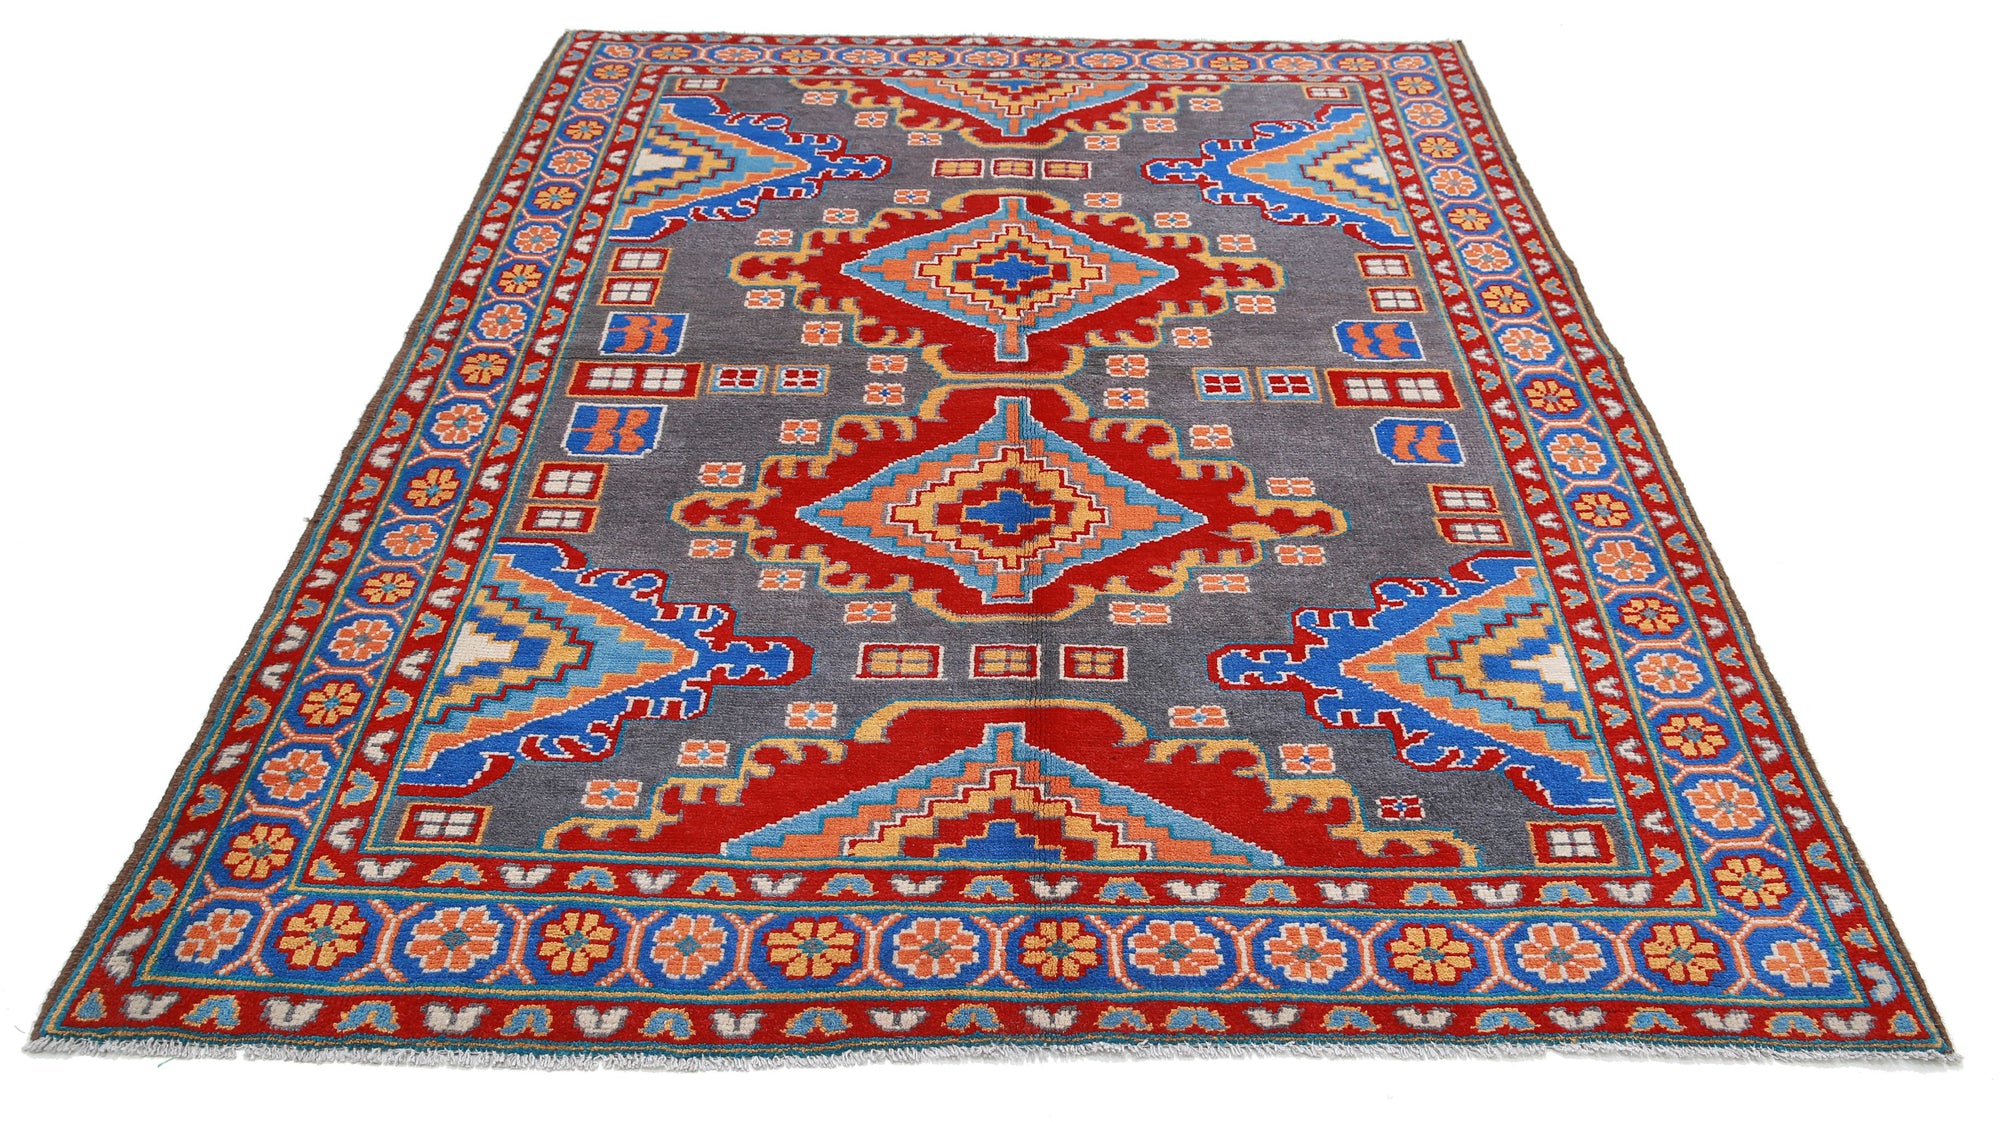 Revival-hand-knotted-qarghani-wool-rug-5014221-3.jpg